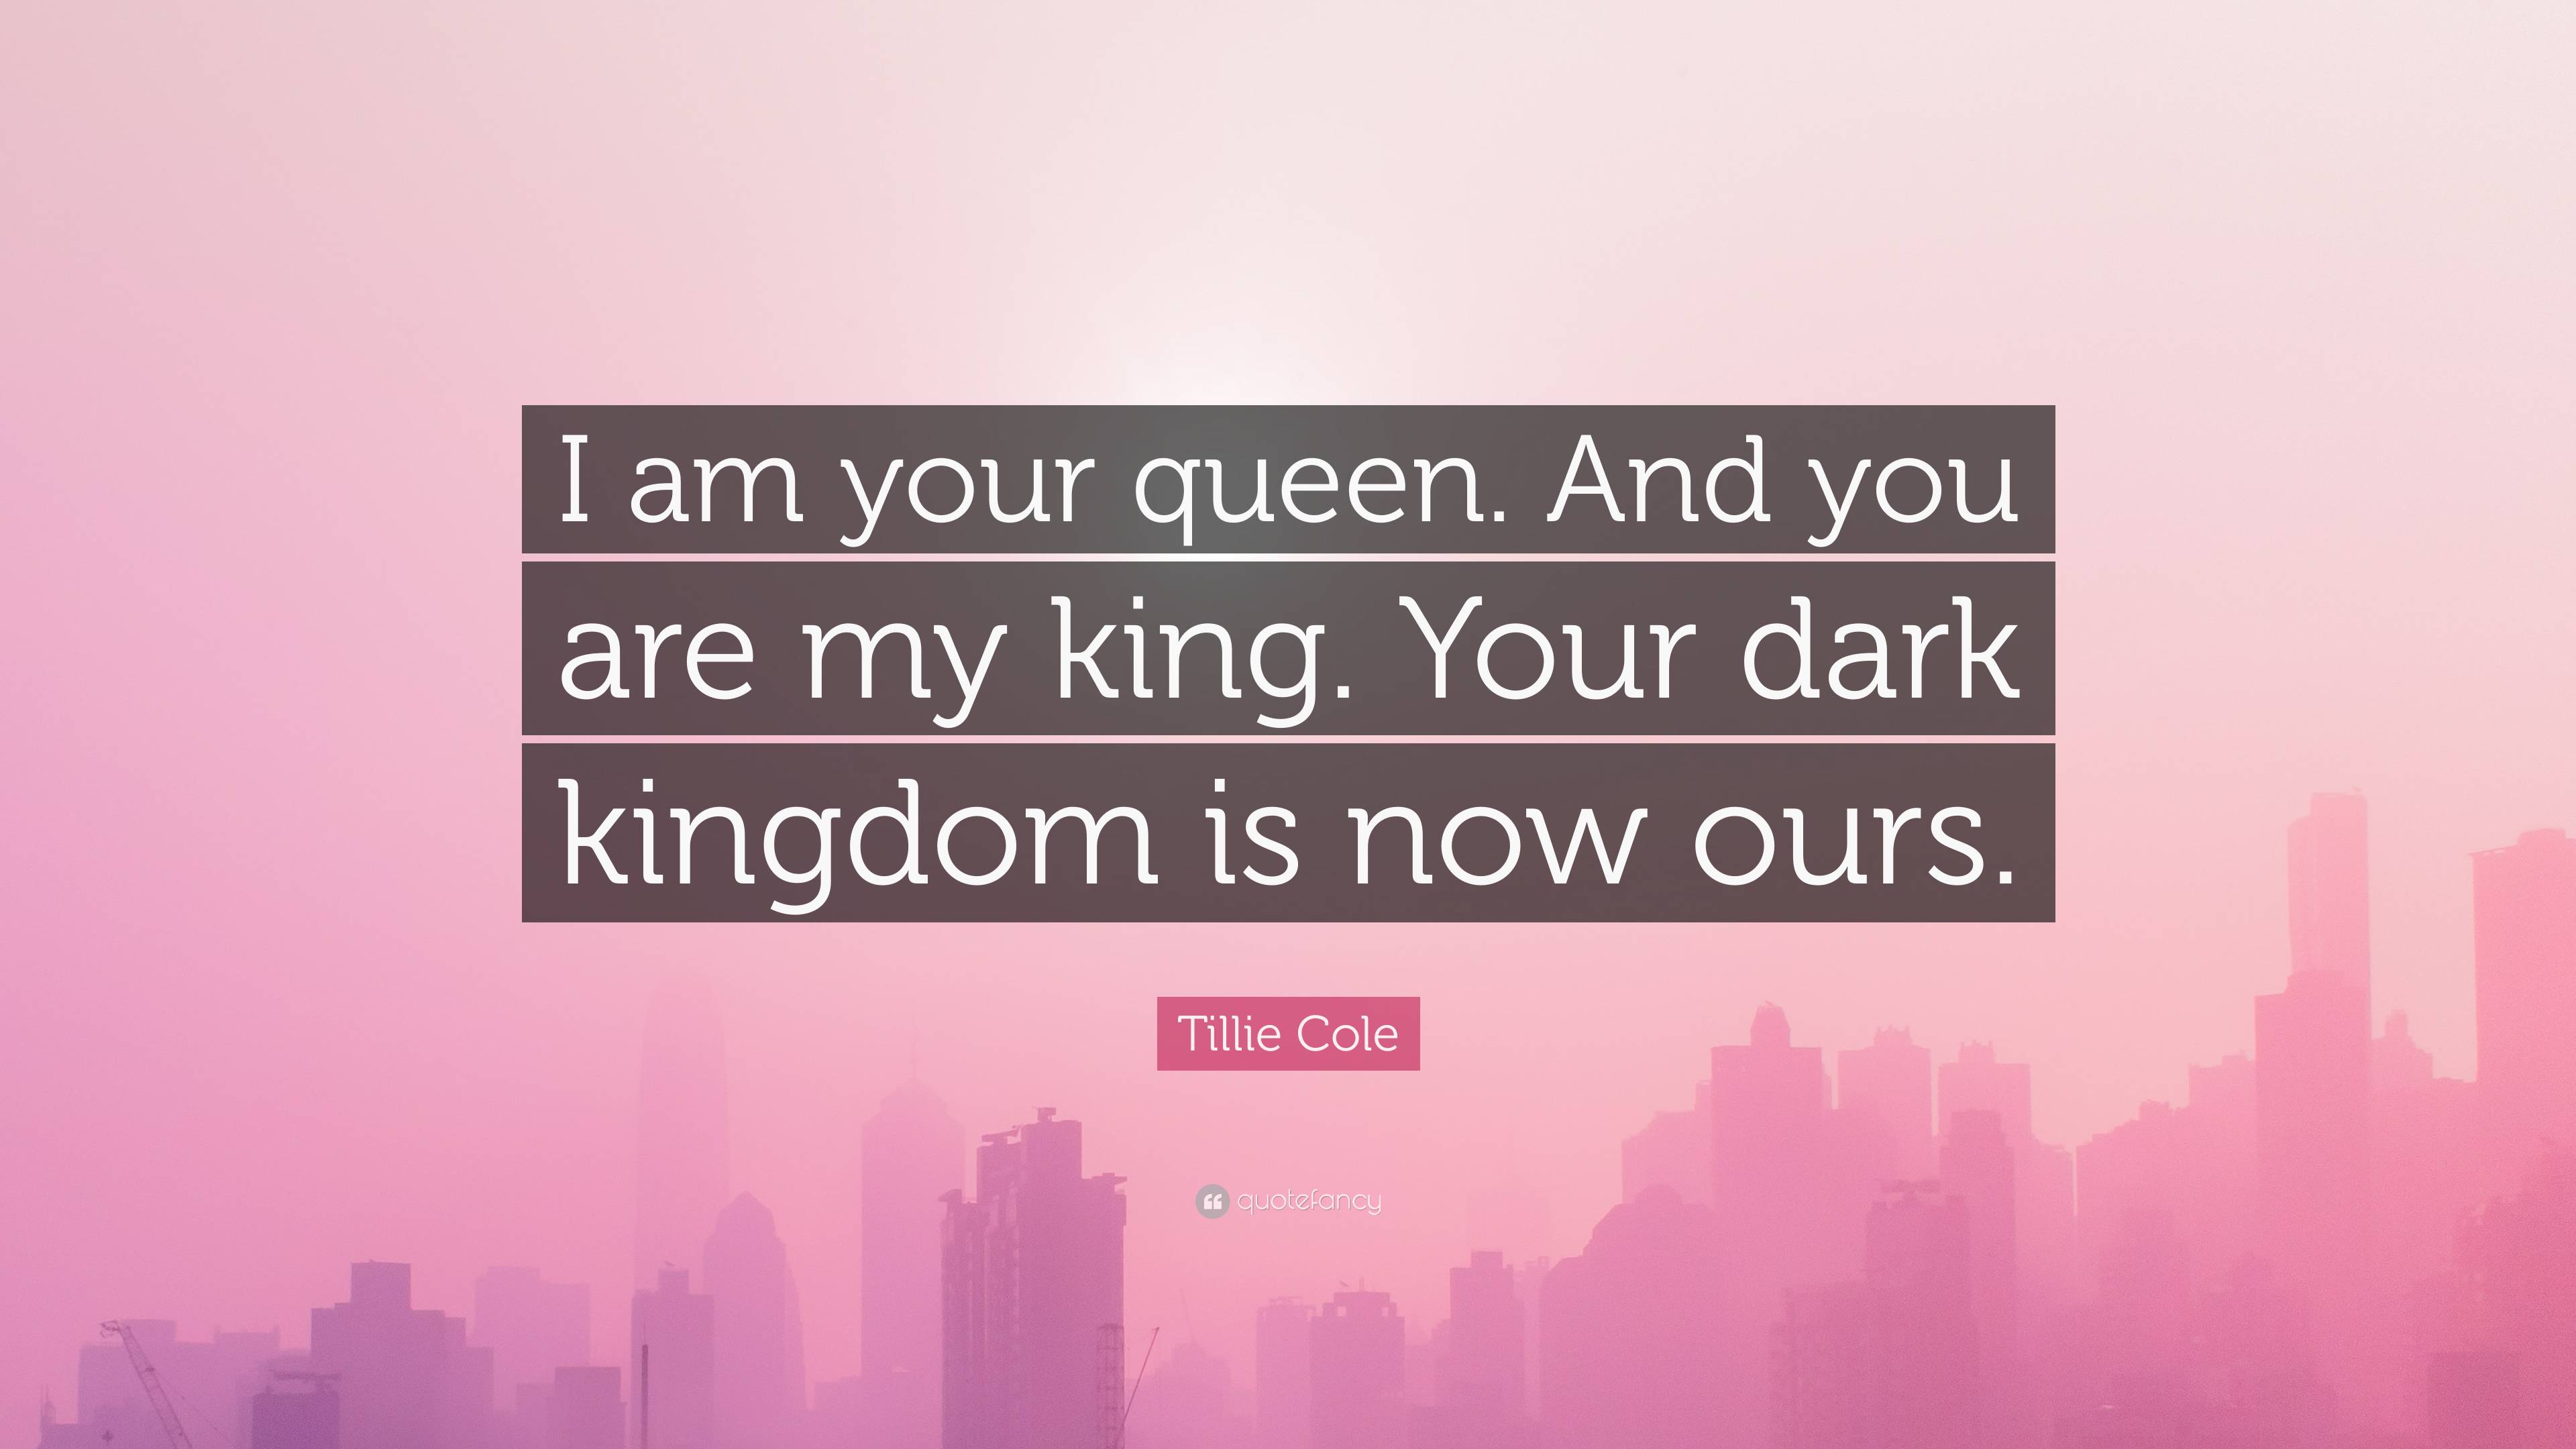 Tillie Cole Quote: “I am your queen. And you are my king. Your dark kingdom  is